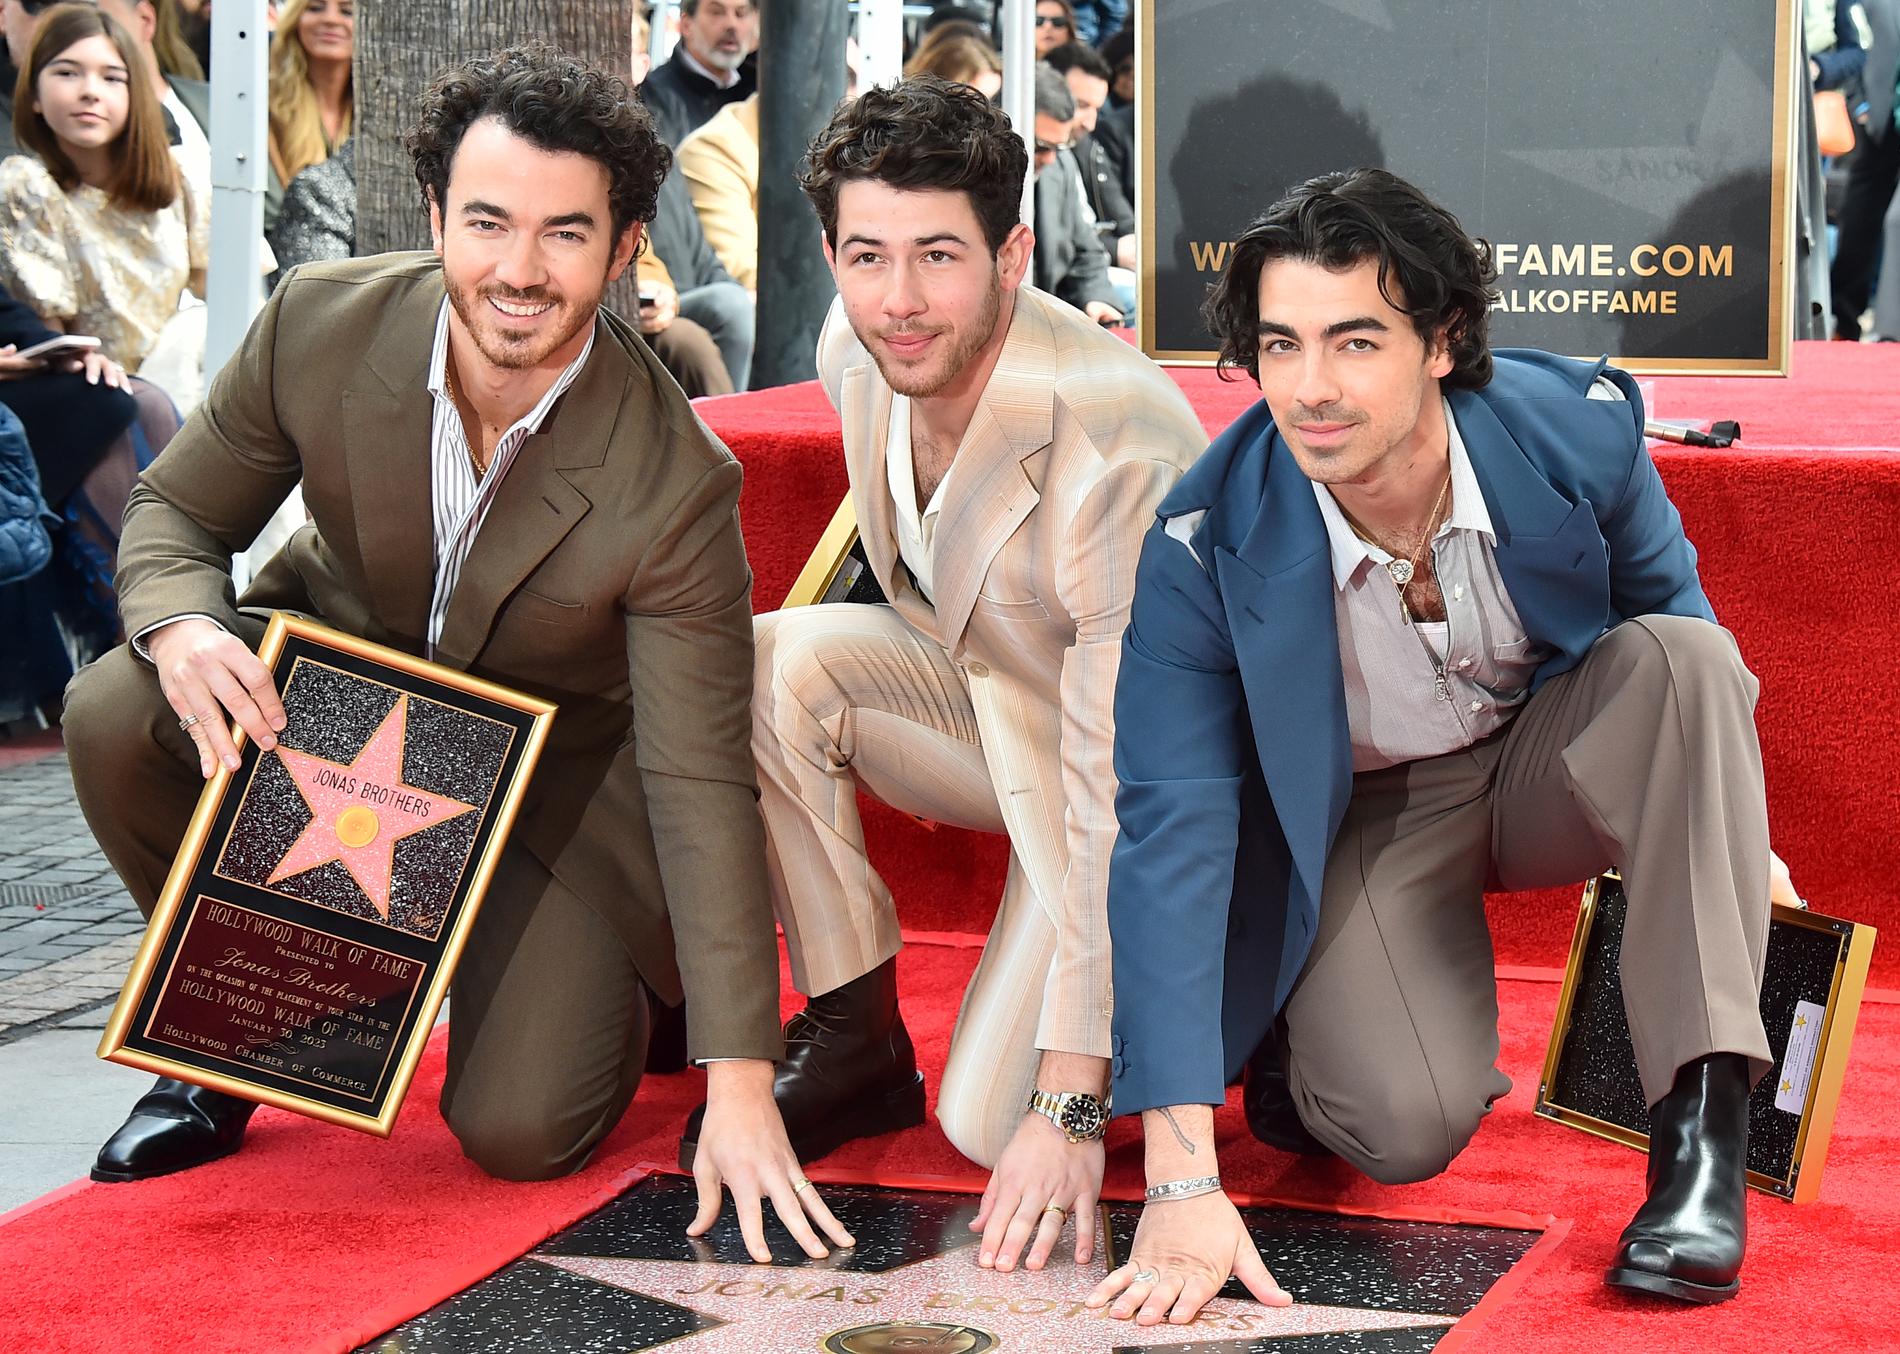 Honoring the Jonas Brothers, he showed off his daughter for the first time